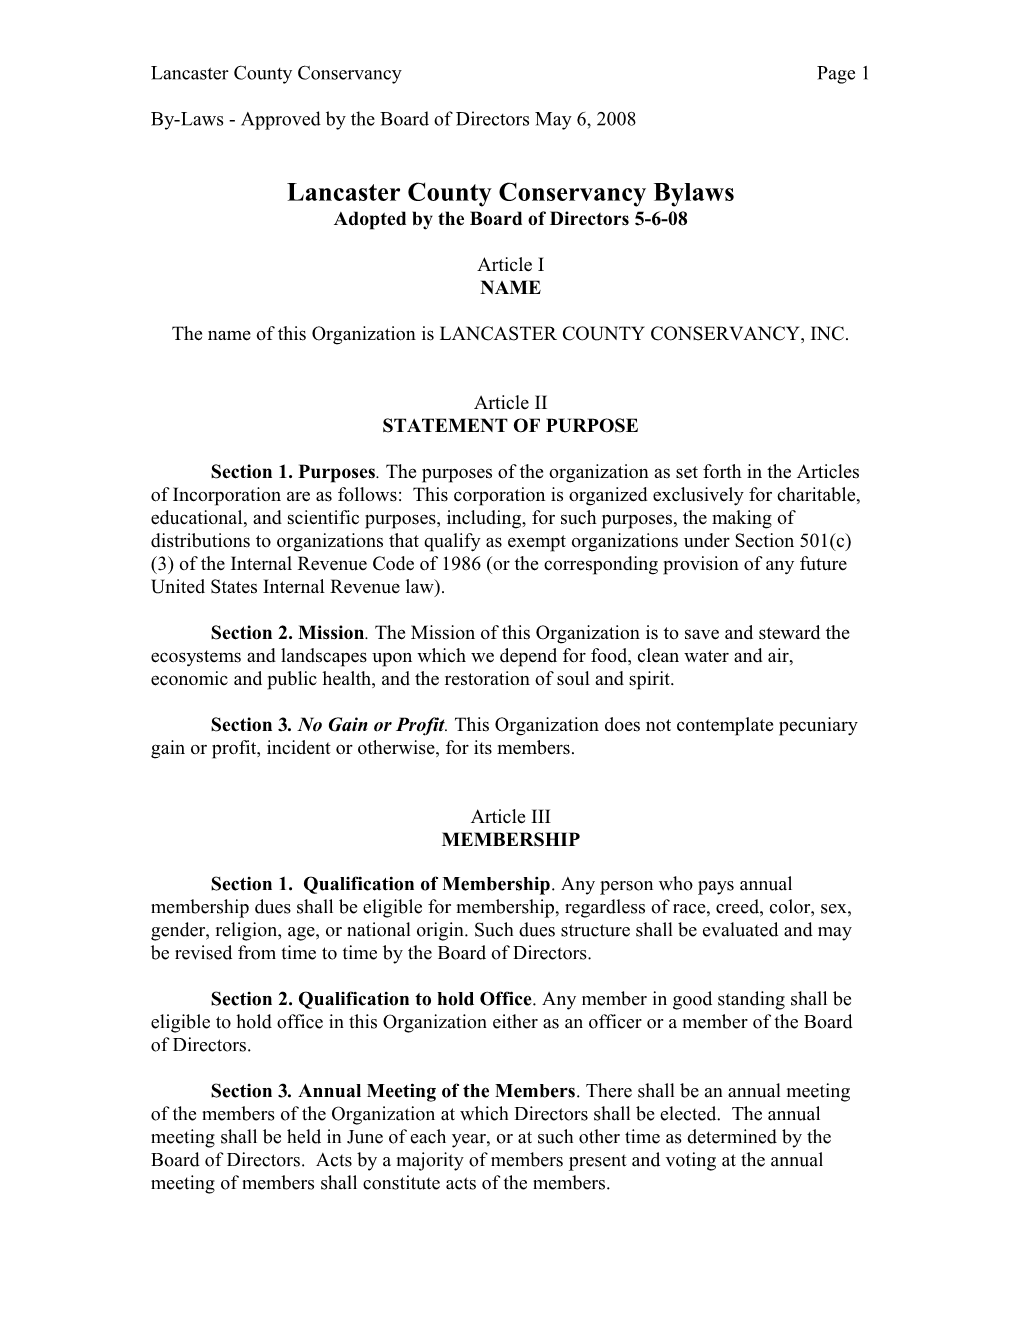 Lancaster County Conservancy Bylaws